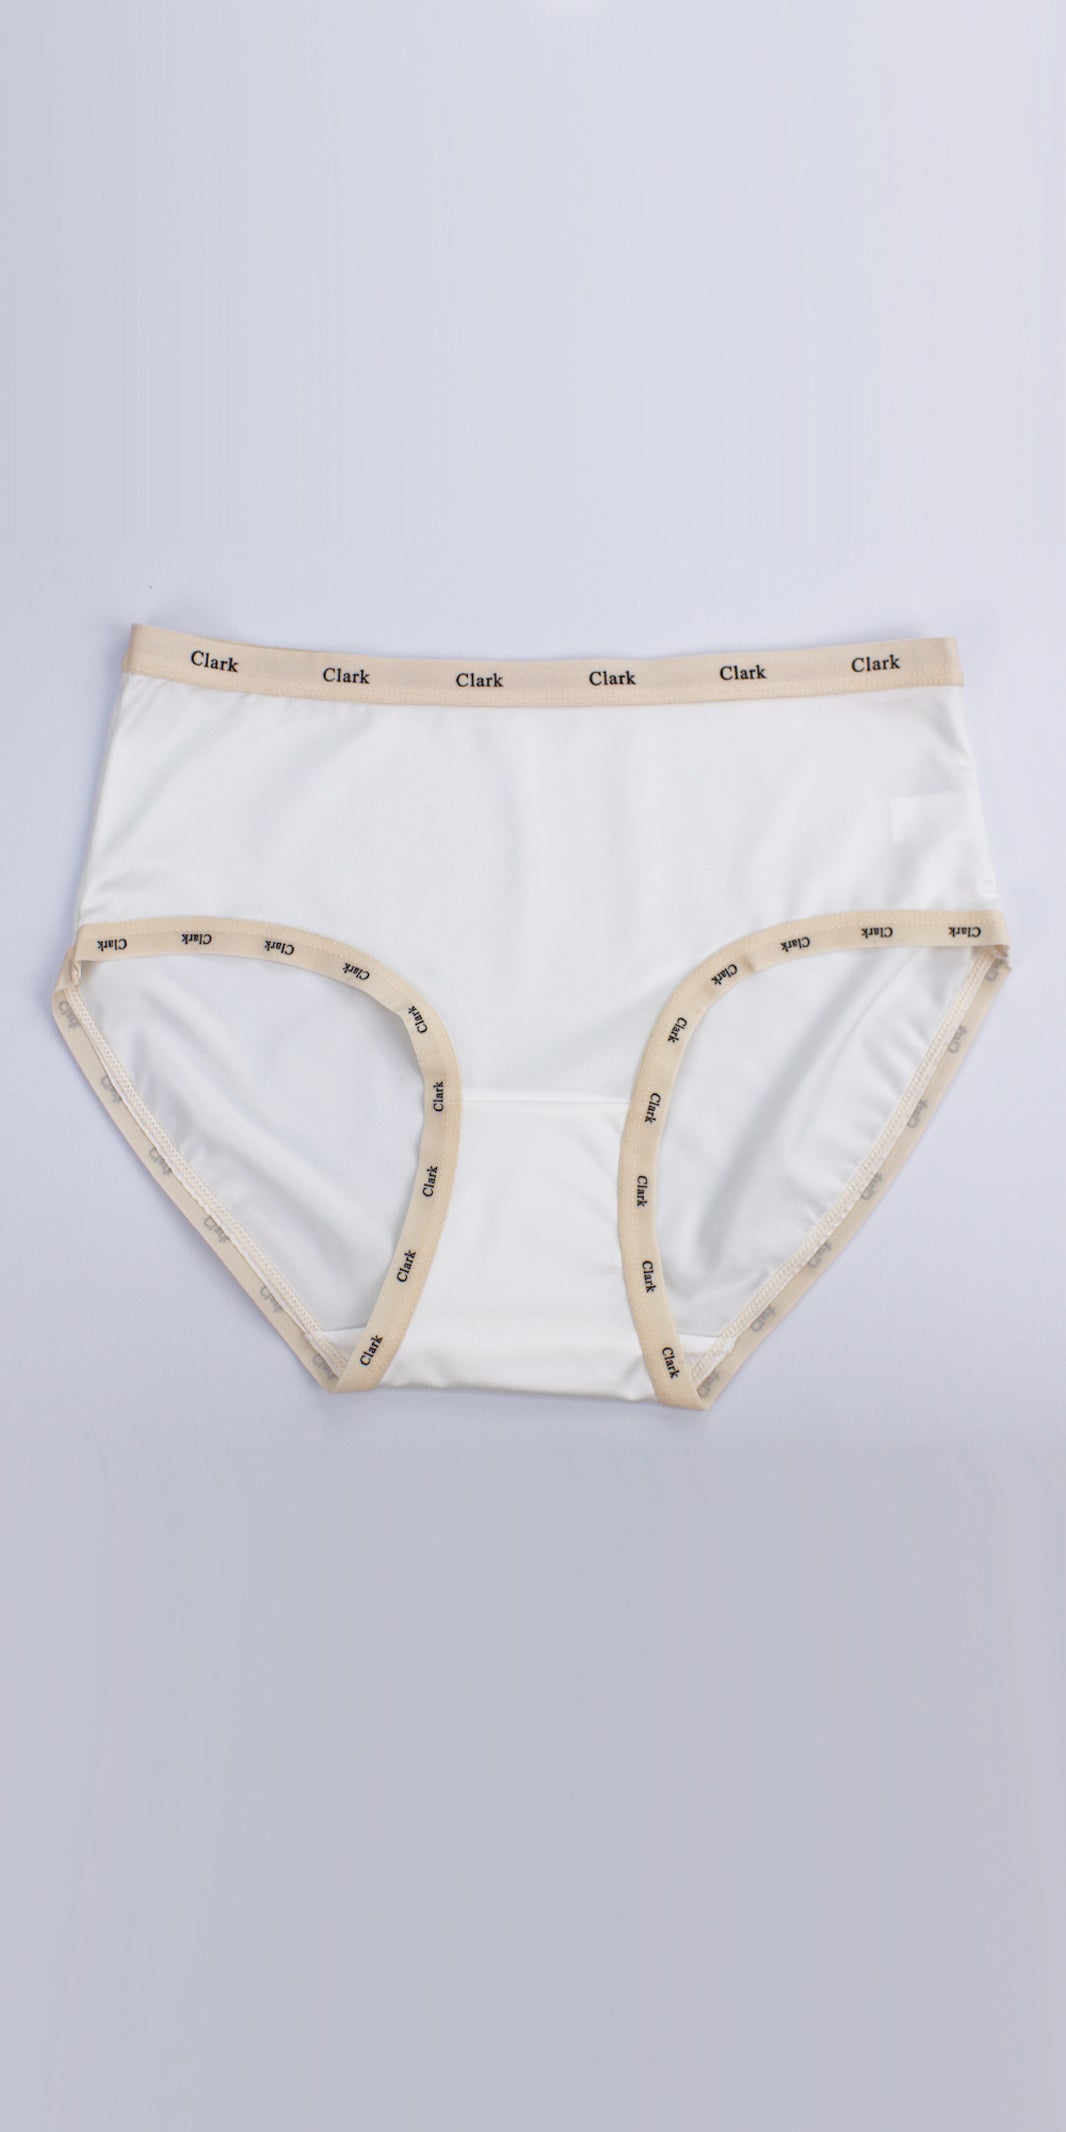 Traceless Breathable Cotton Antibacterial Crotch Mid Waist Monogrammed Panties